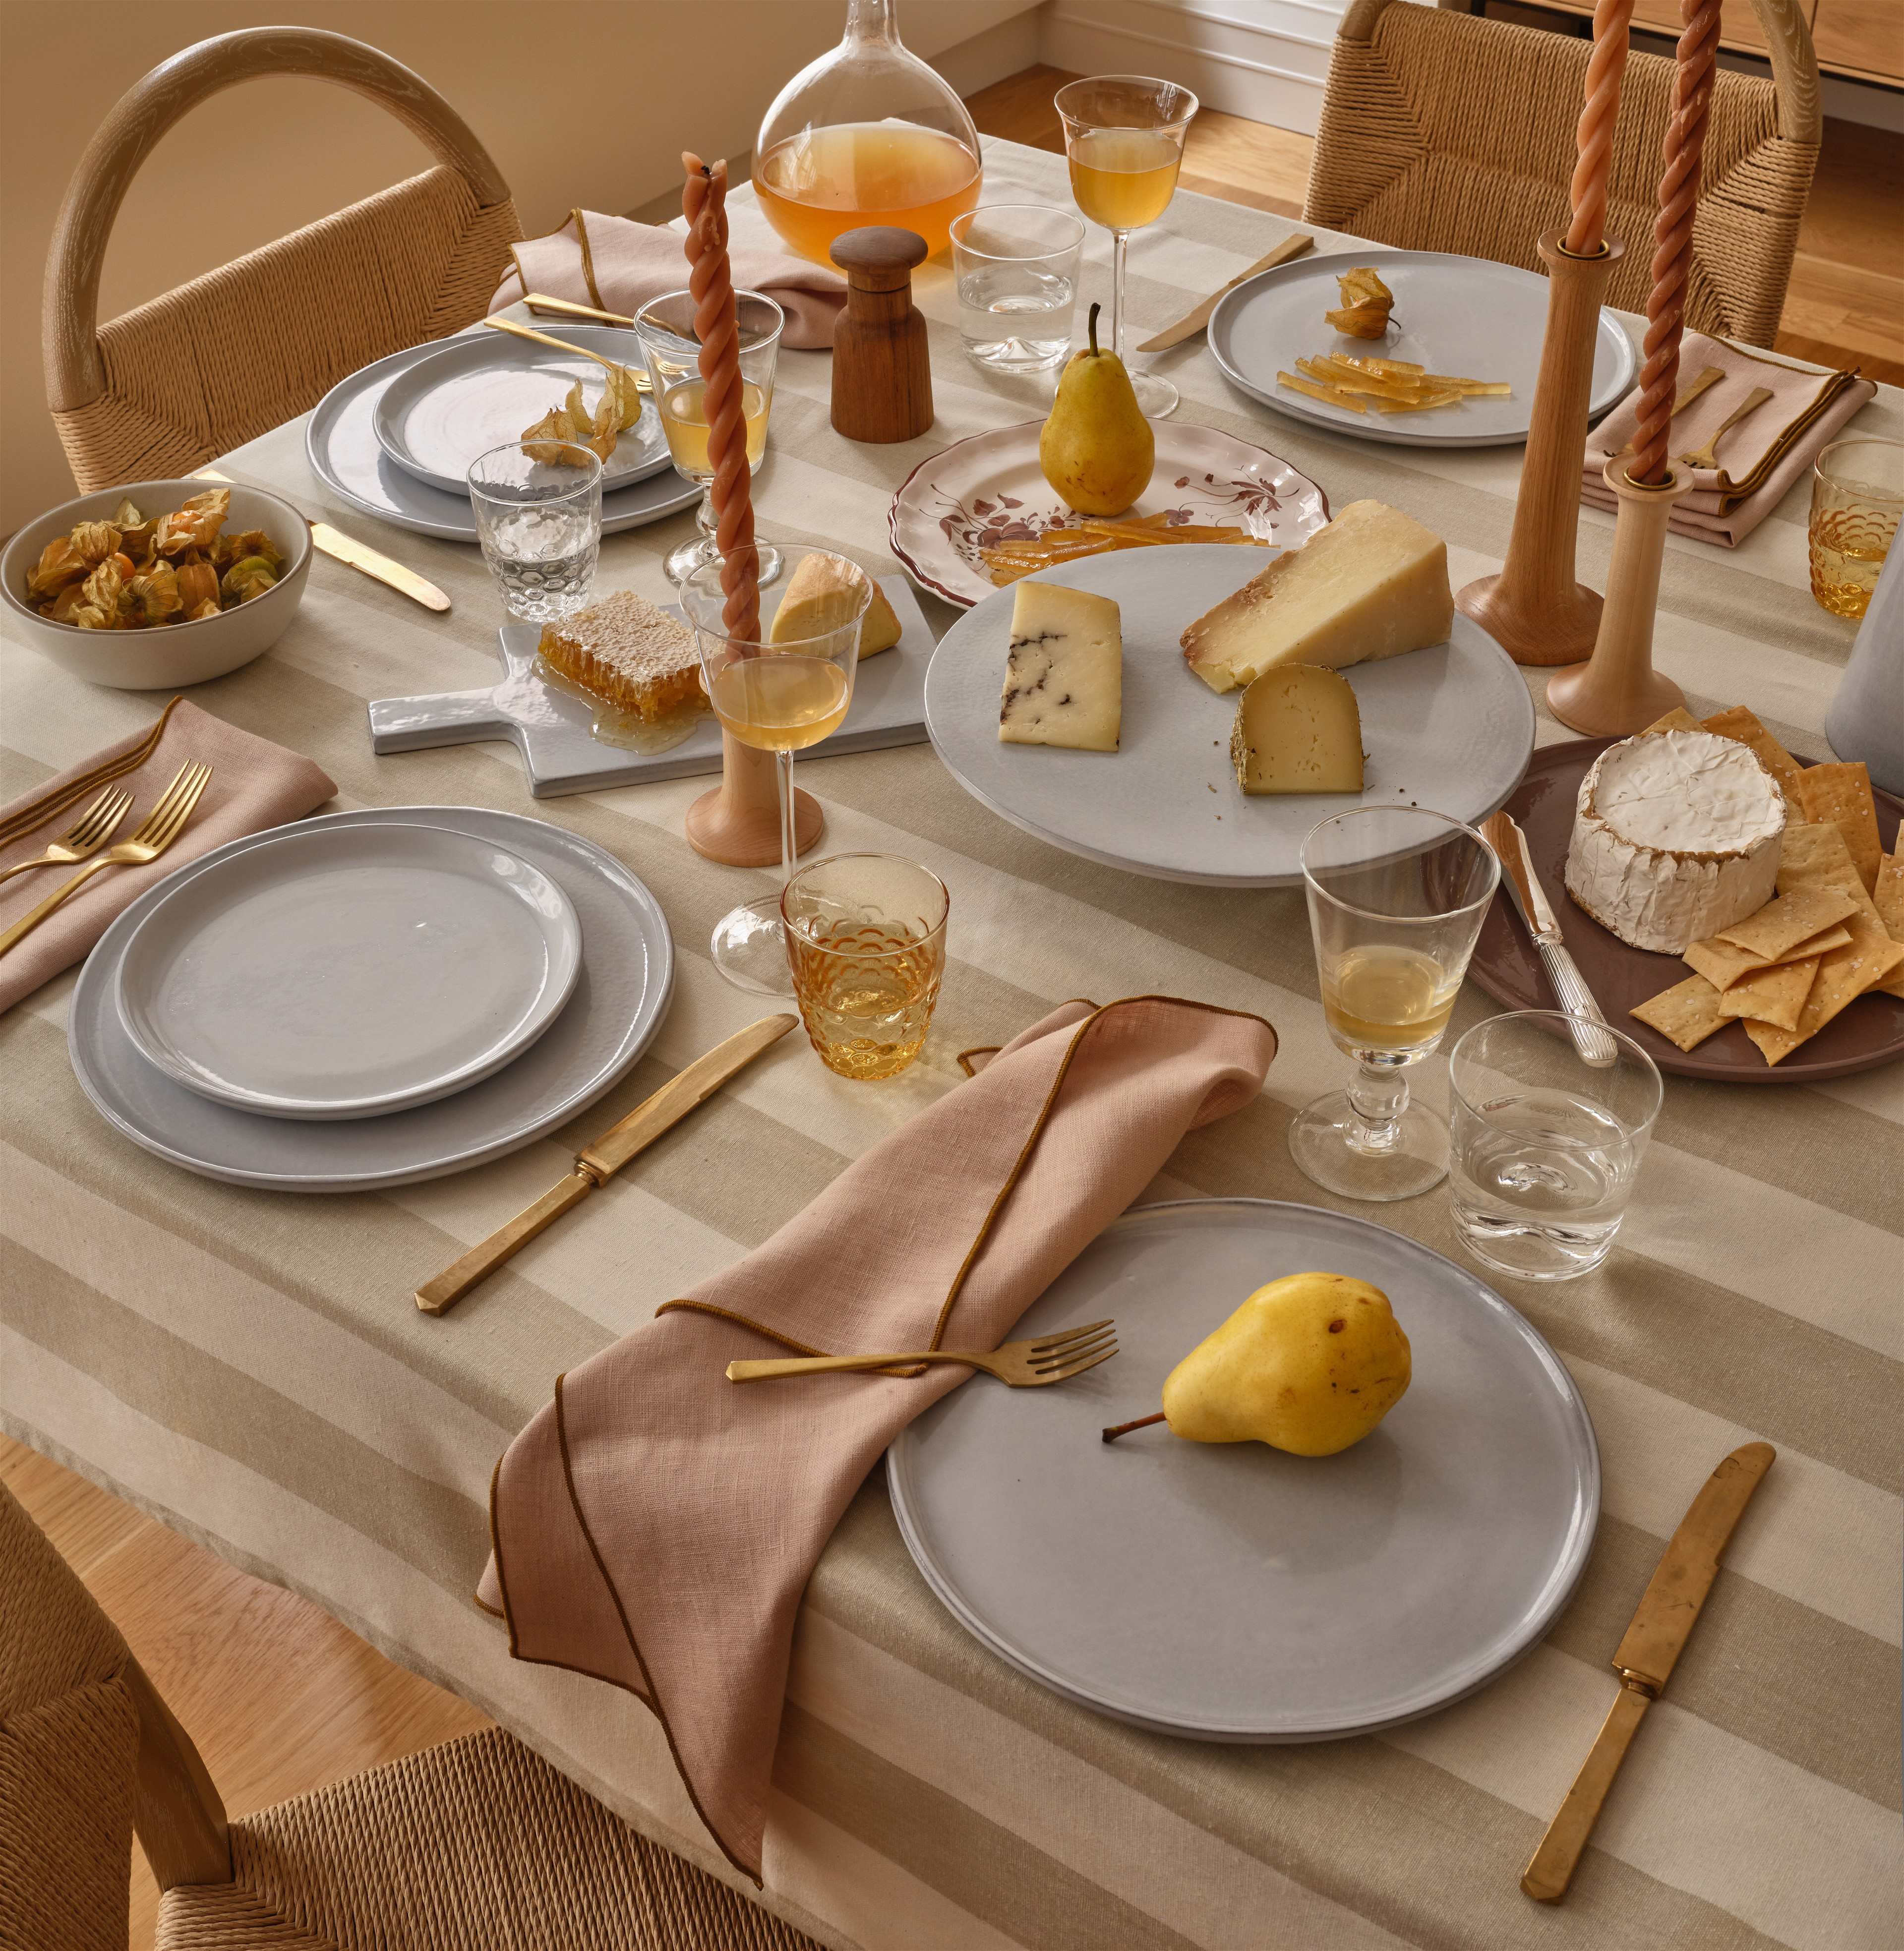 a table set with plates, silverware and a pear